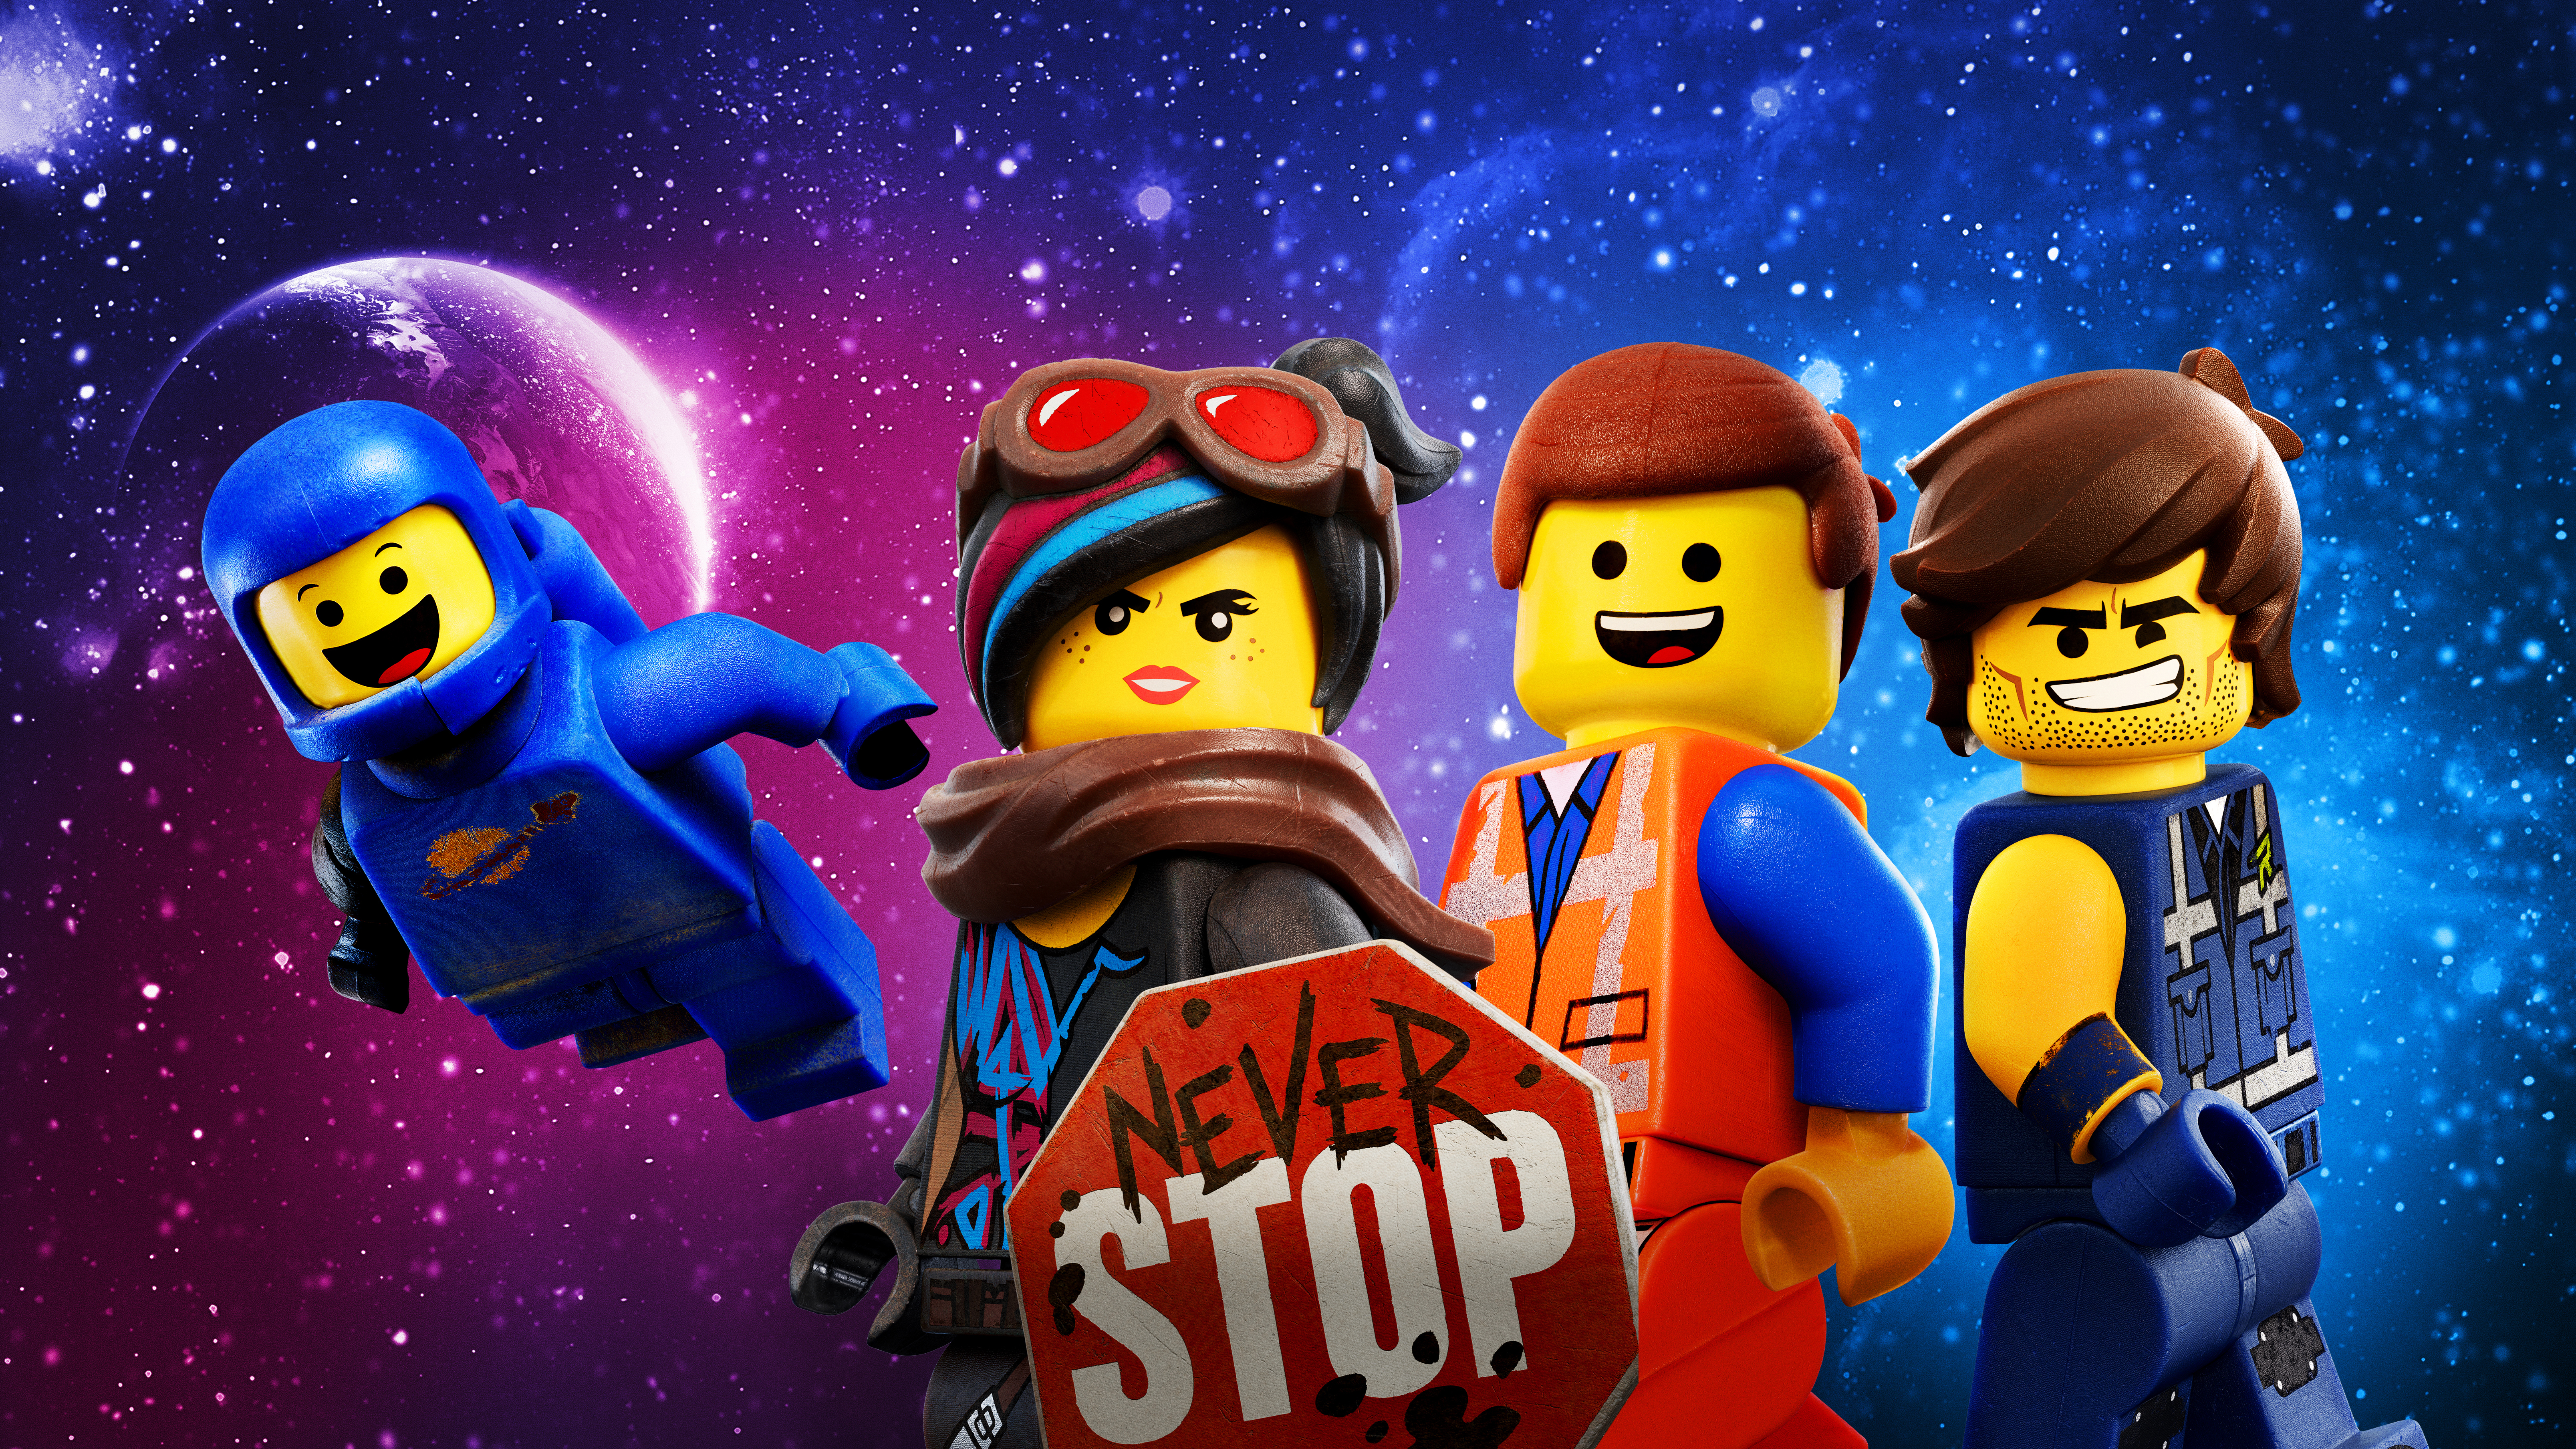 movie, the lego movie 2: the second part, emmet (the lego movie), wyldstyle (the lego movie)